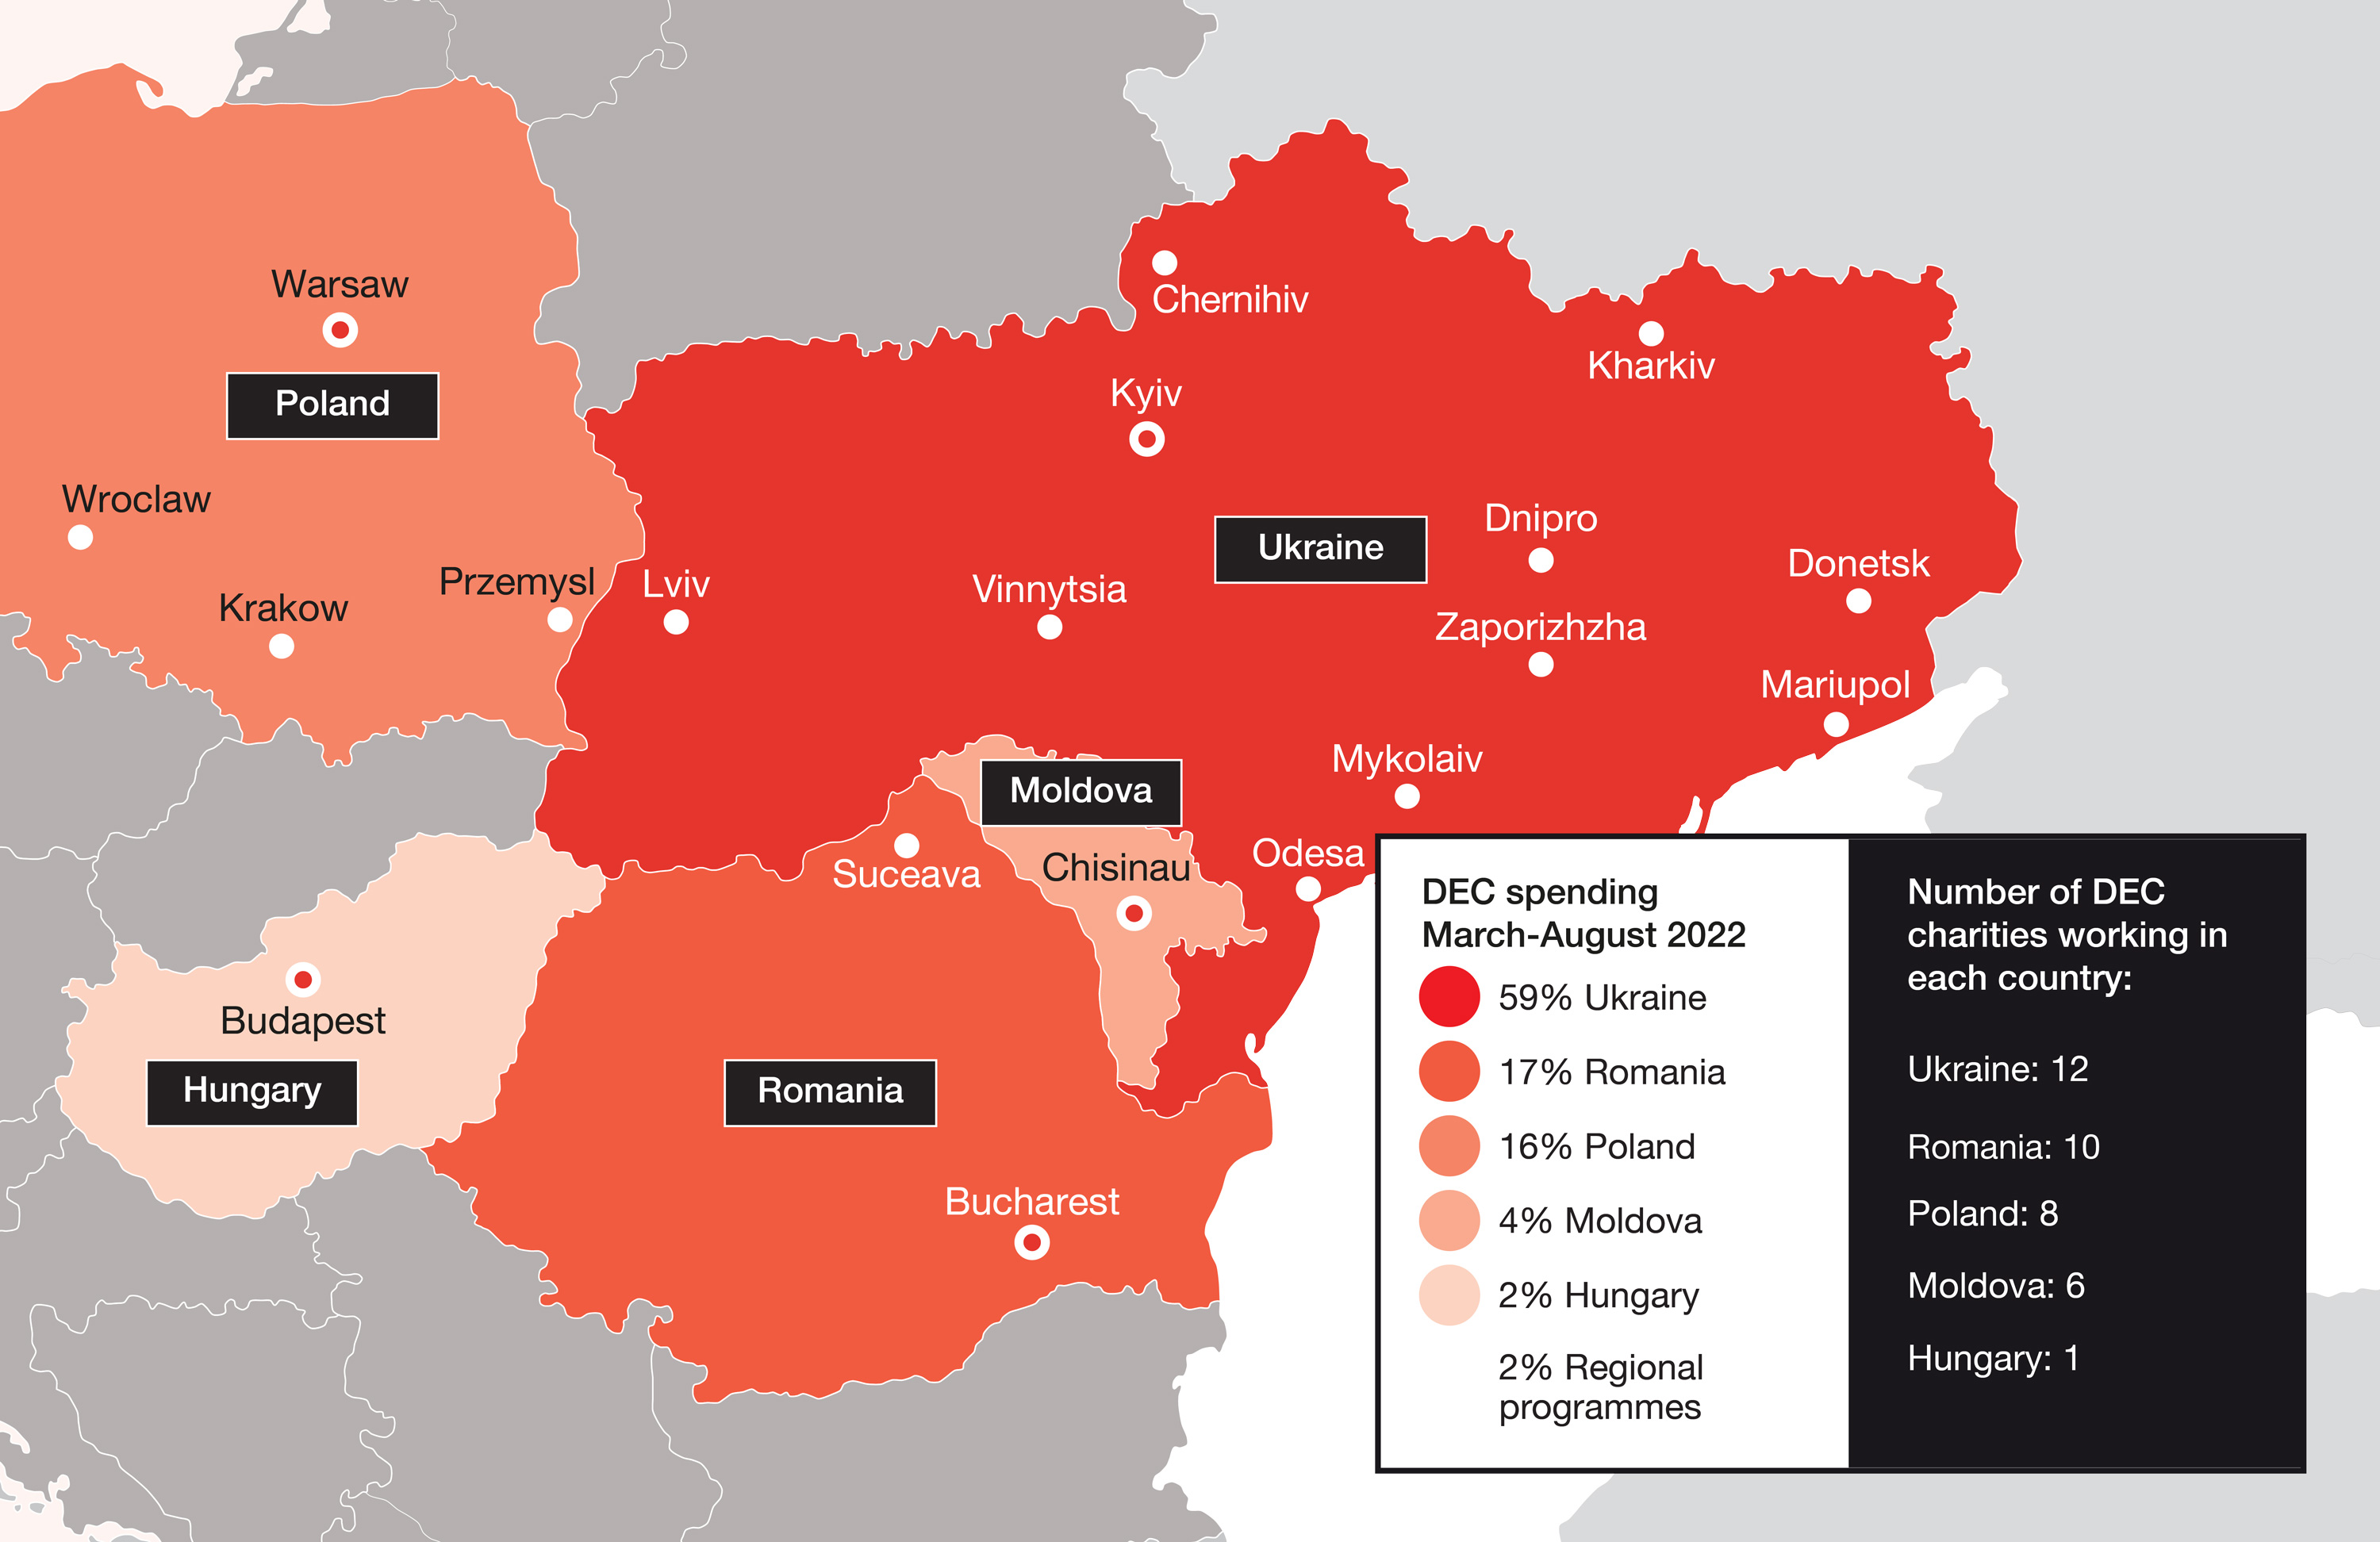 Map of Europe highlighting regions mentioned in this report